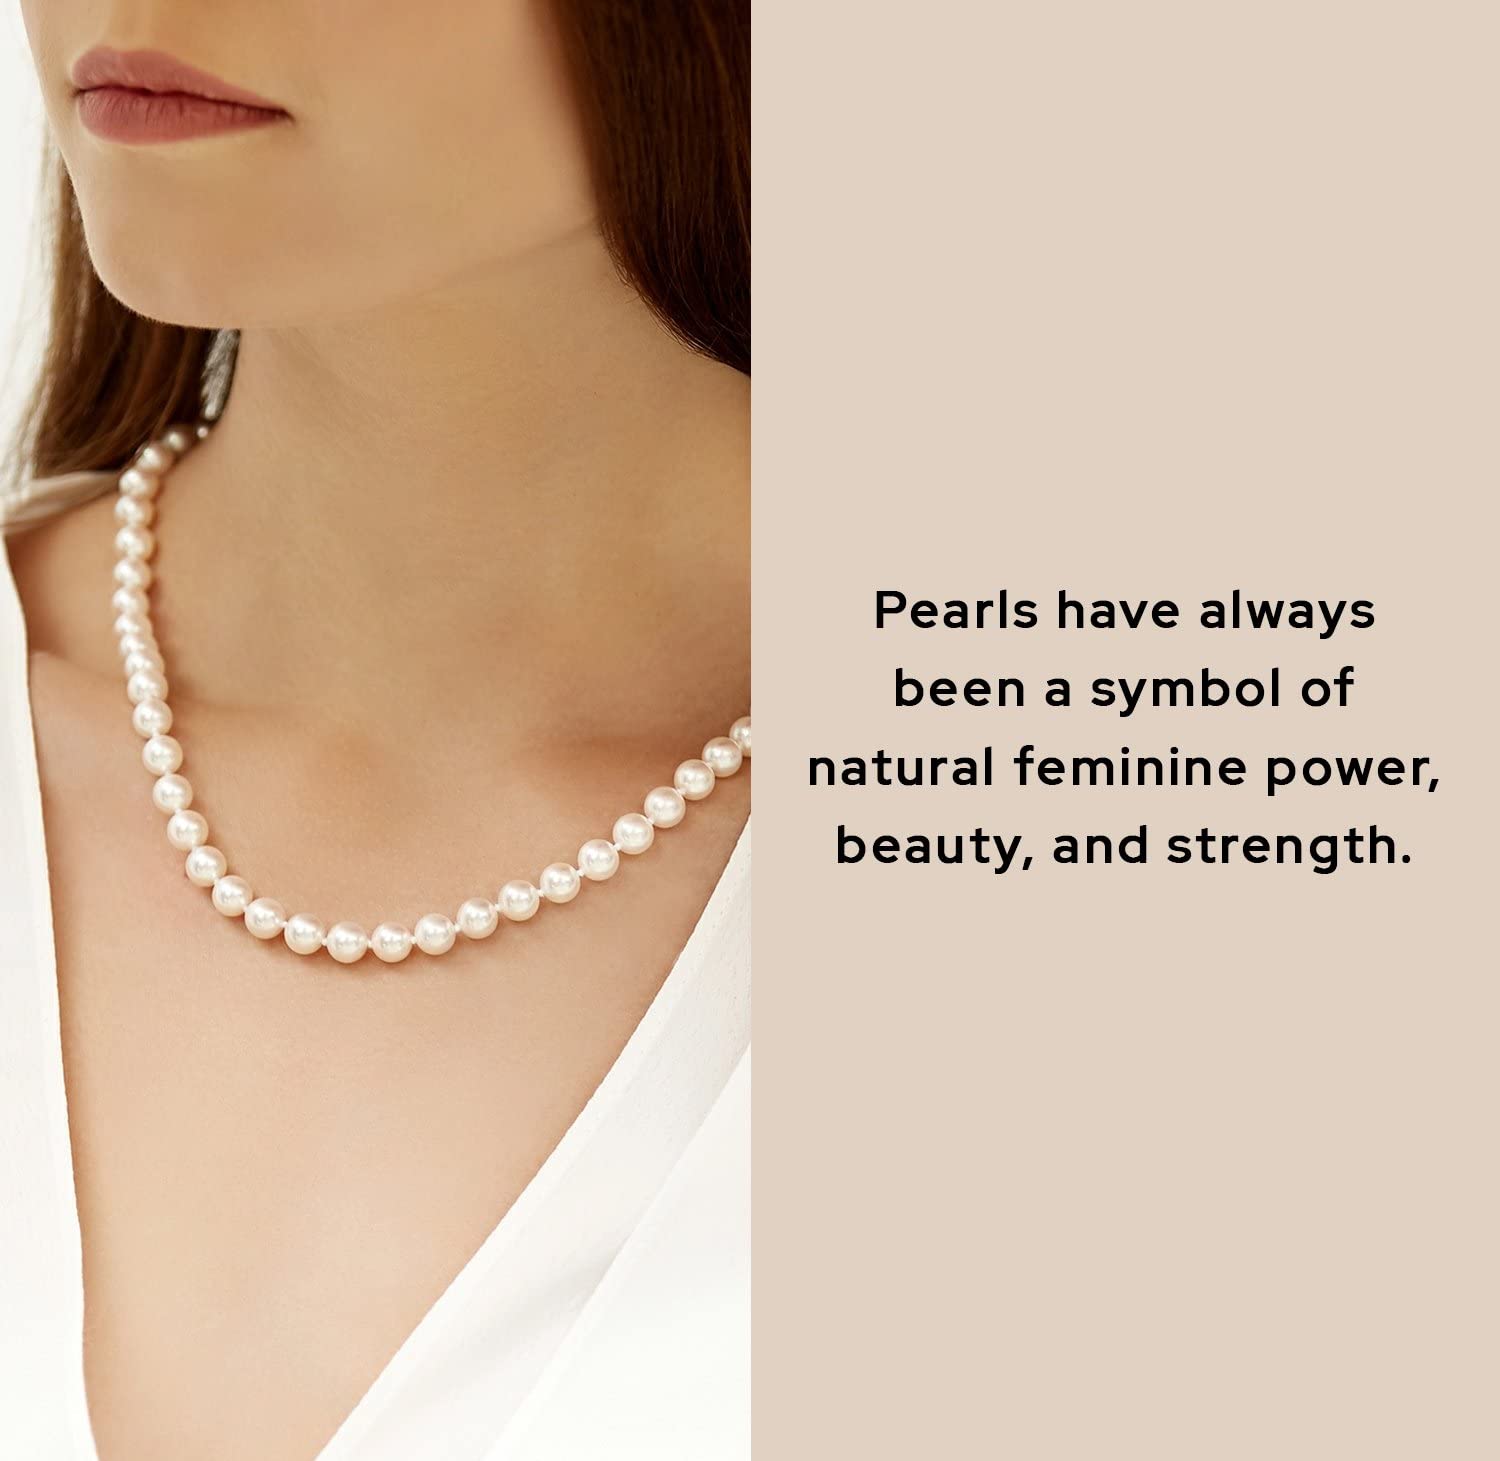 The Pearl Source Real Pearl Necklace for Women with AAA+ Quality Round White Freshwater Genuine Cultured Pearls | 18 inch Pearl Strand with 14K Gold Clasp